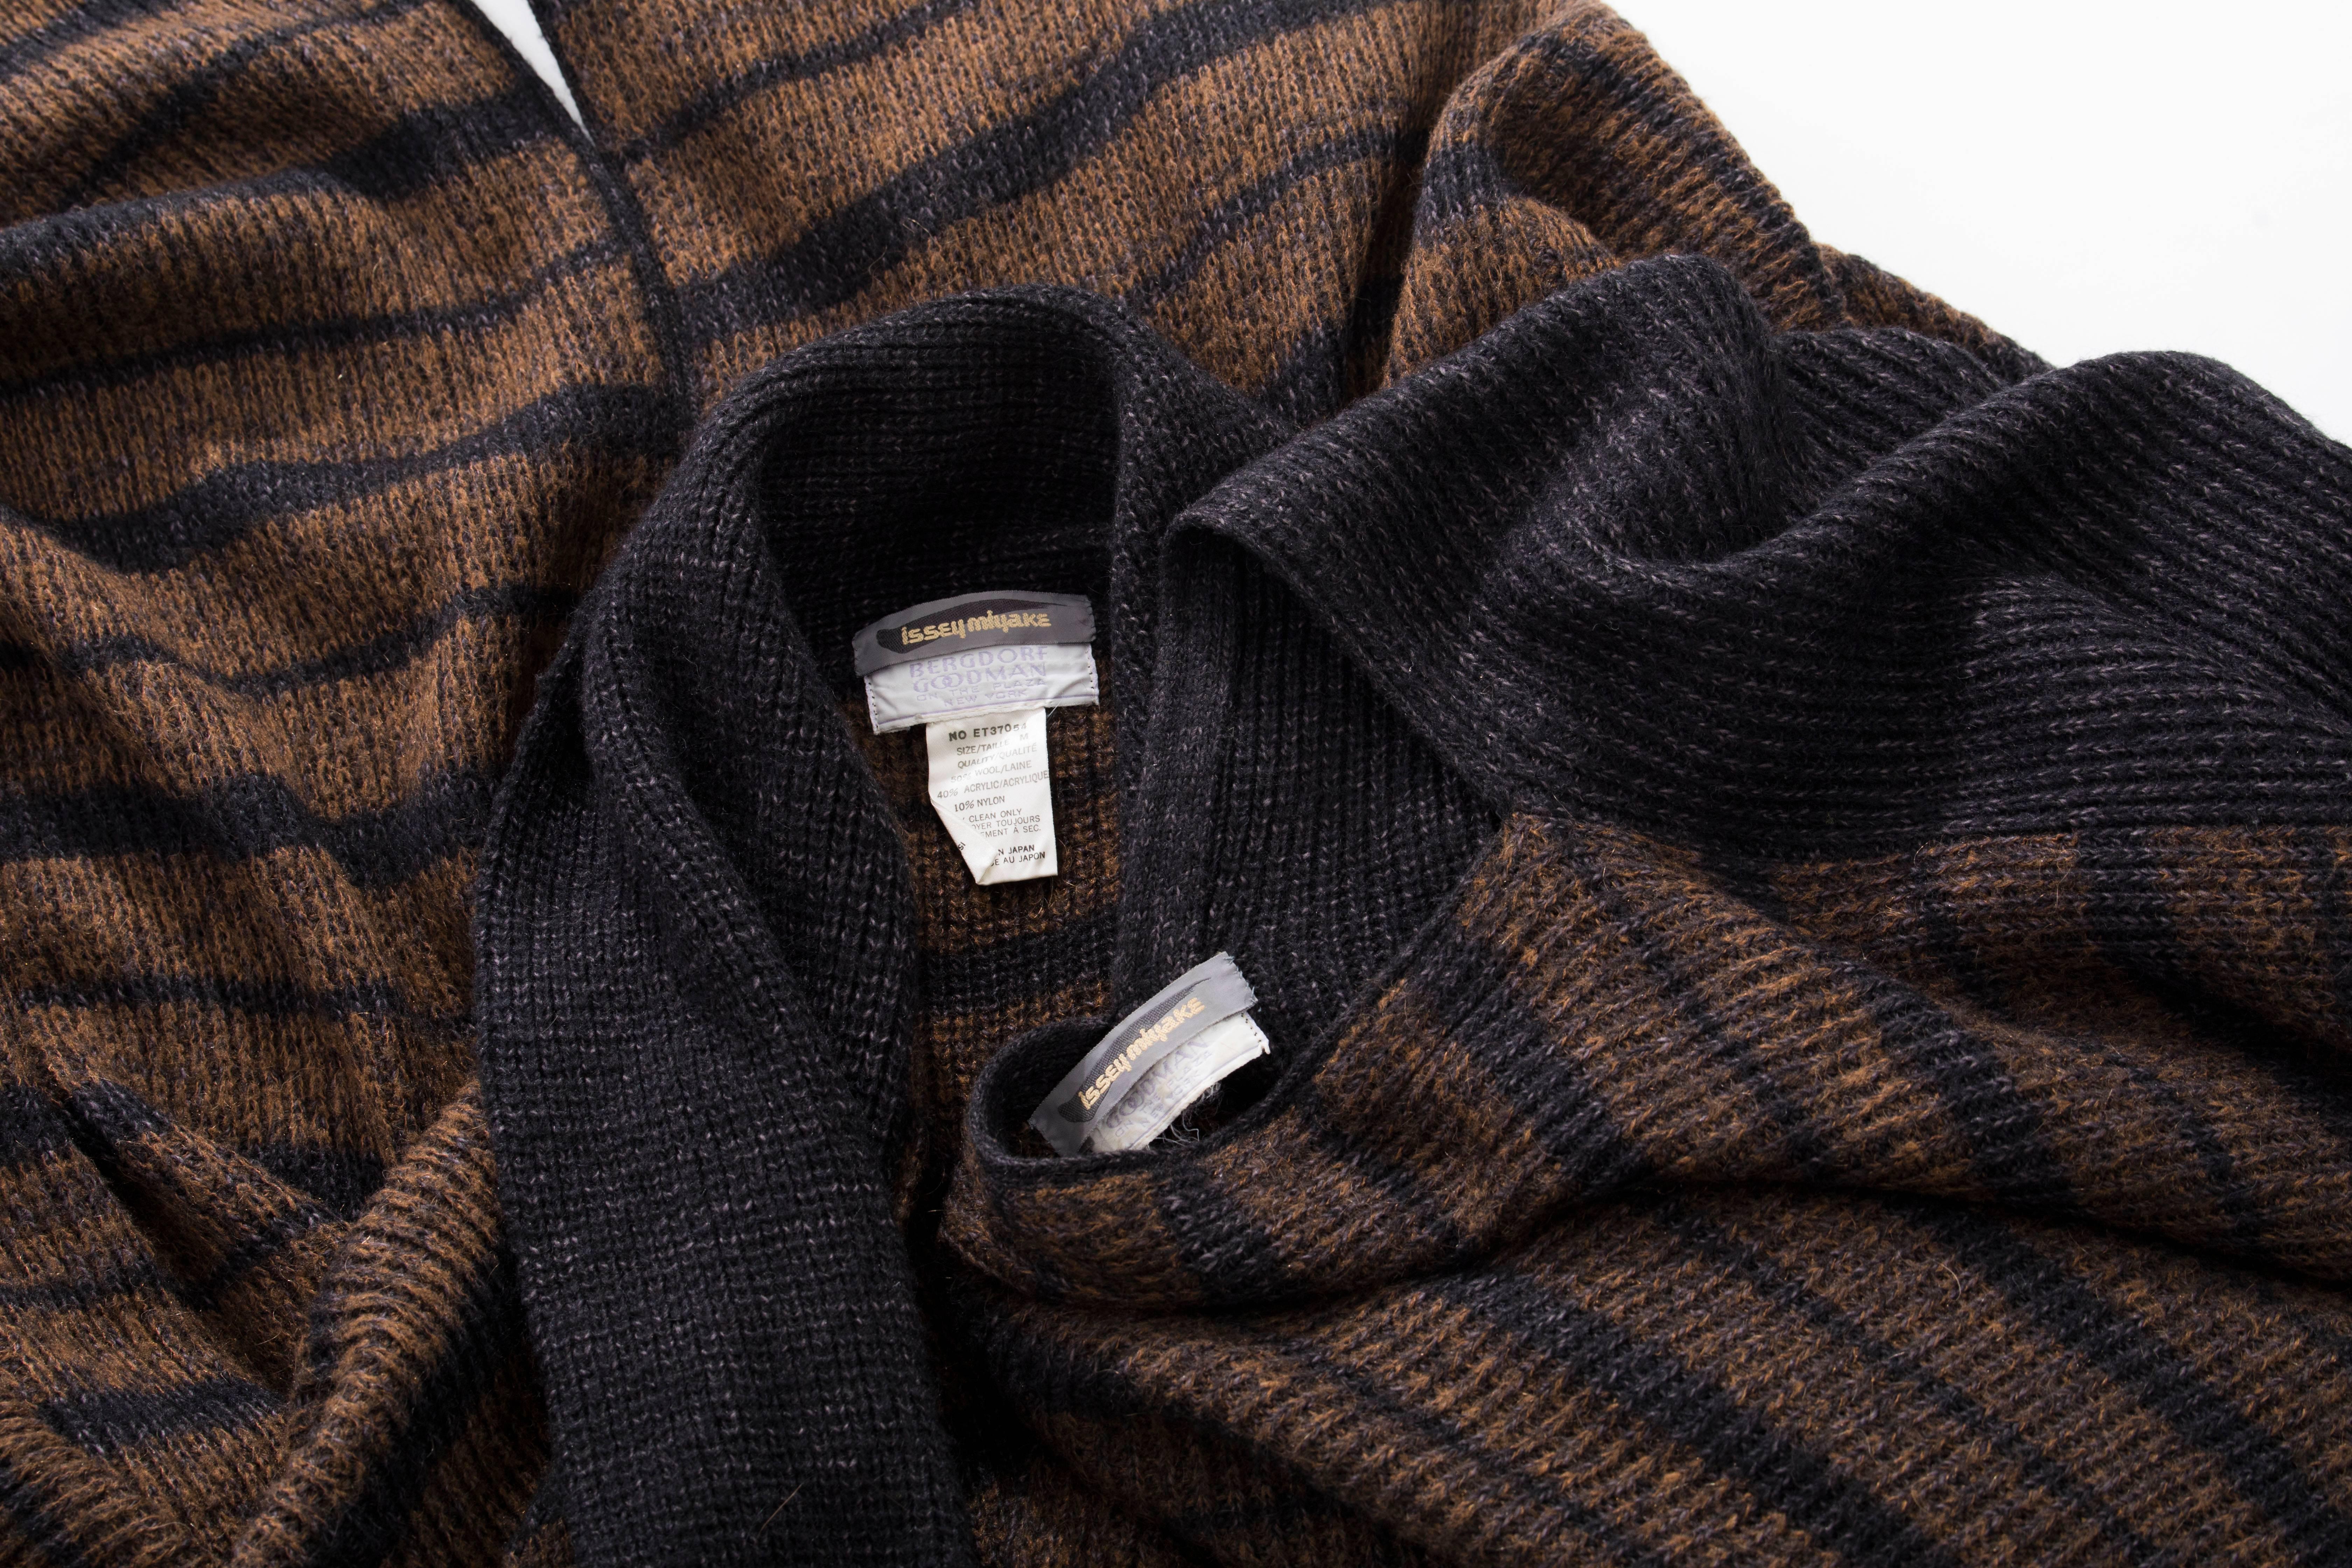 Issey Miyake Striped Wool Sweater Dress Cocoon Cardigan Ensemble, Circa 1970s For Sale 2